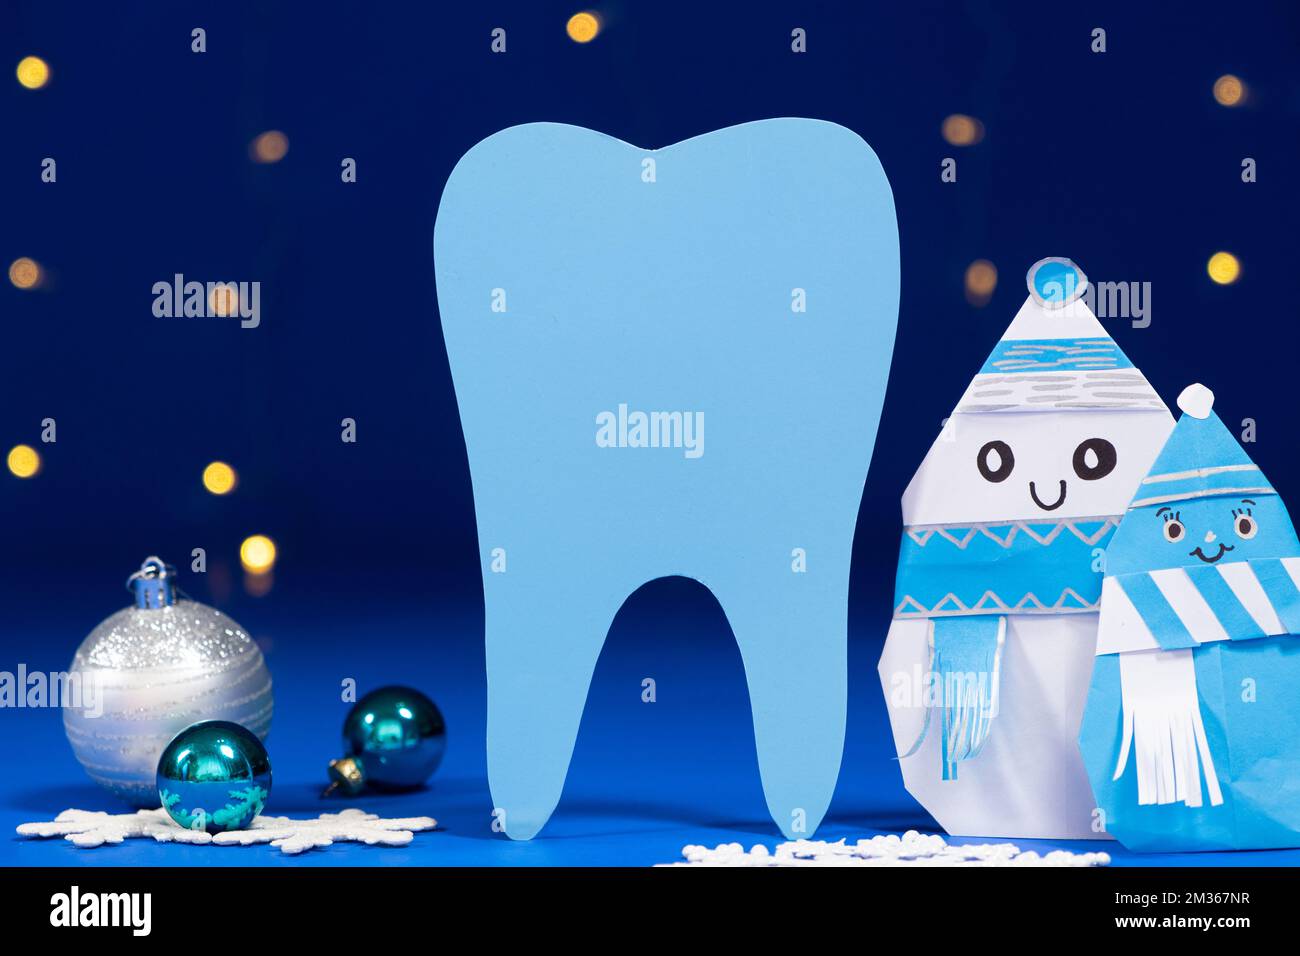 Christmas dentistry - big tooth, snowmen and balls on a blue background, garlands of bokeh. Stock Photo